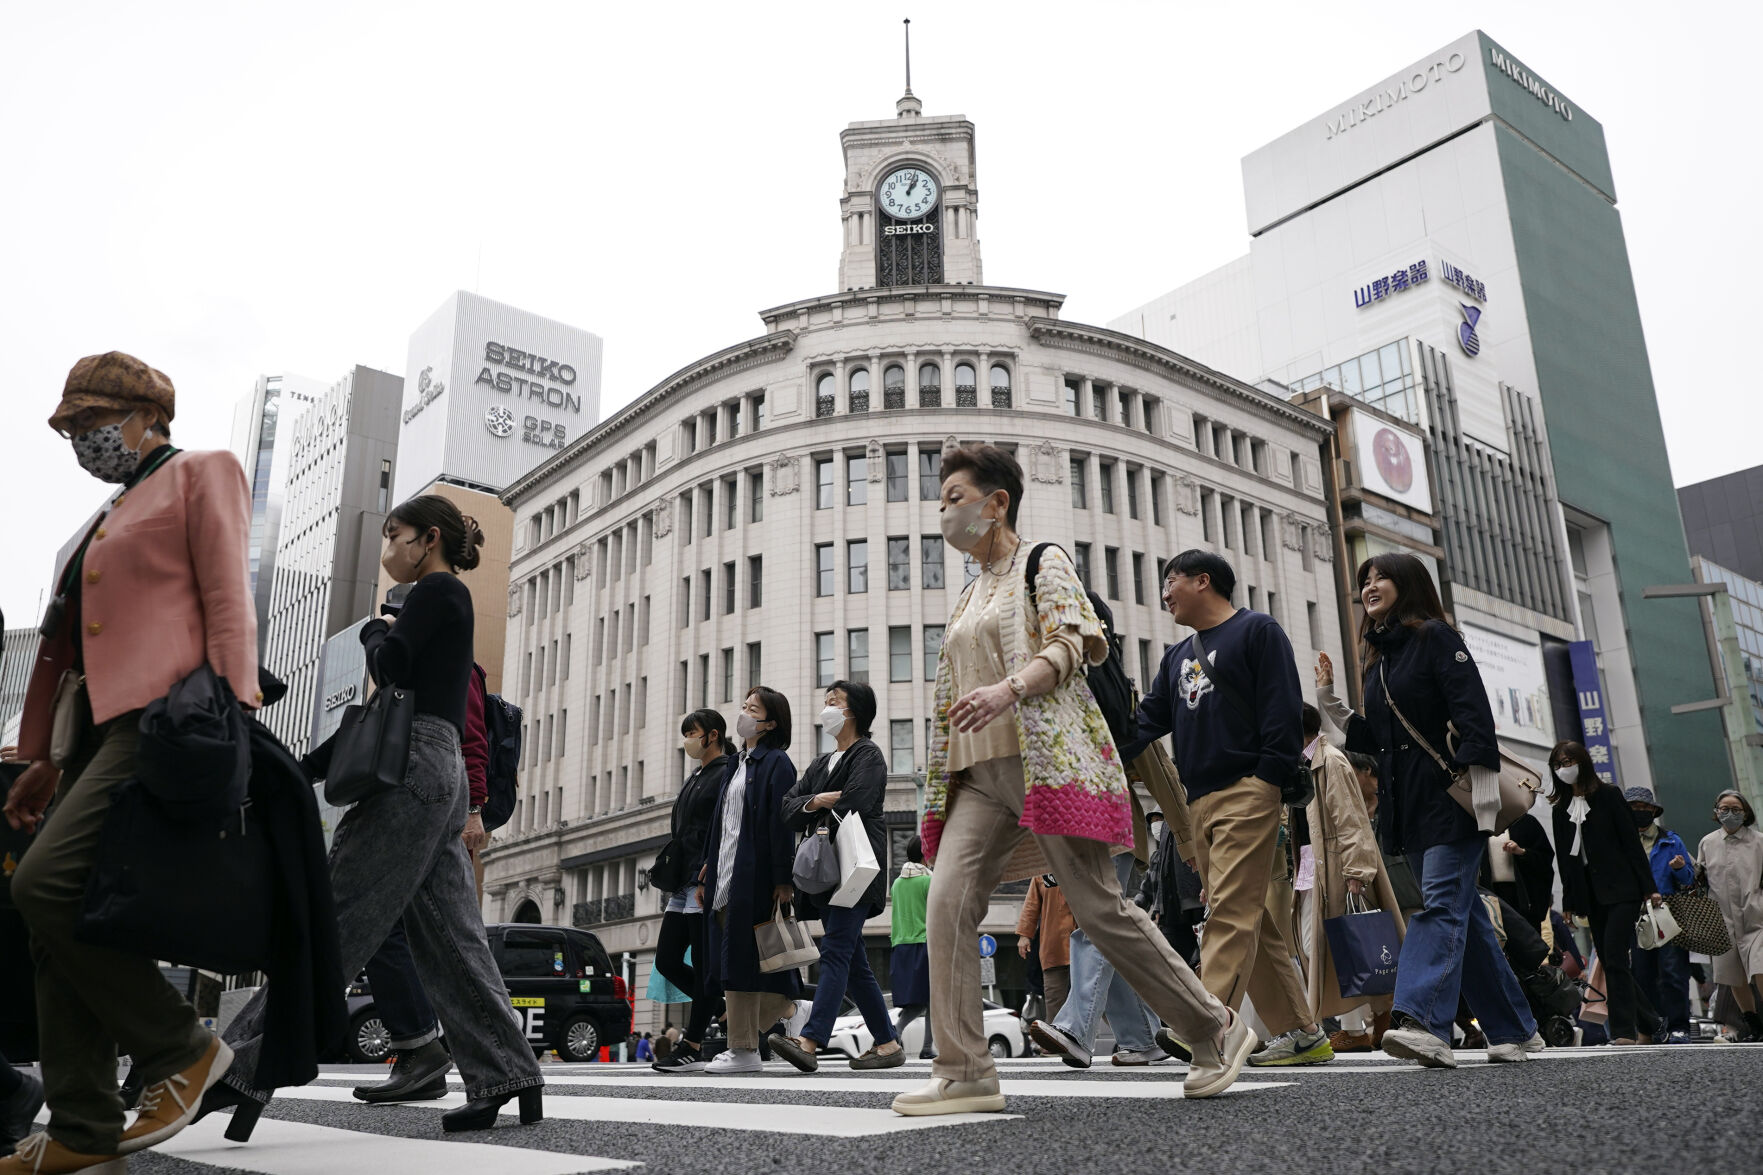 <p>FILE - People walk across a pedestrian crossing in Ginza shopping district on March 31, 2023, in Tokyo. Business sentiment among big Japanese manufacturers improved in July-September for the second straight quarter, according to a central bank survey released Monday, Oct 2. (AP Photo/Eugene Hoshiko, File)</p>   PHOTO CREDIT: Eugene Hoshiko 